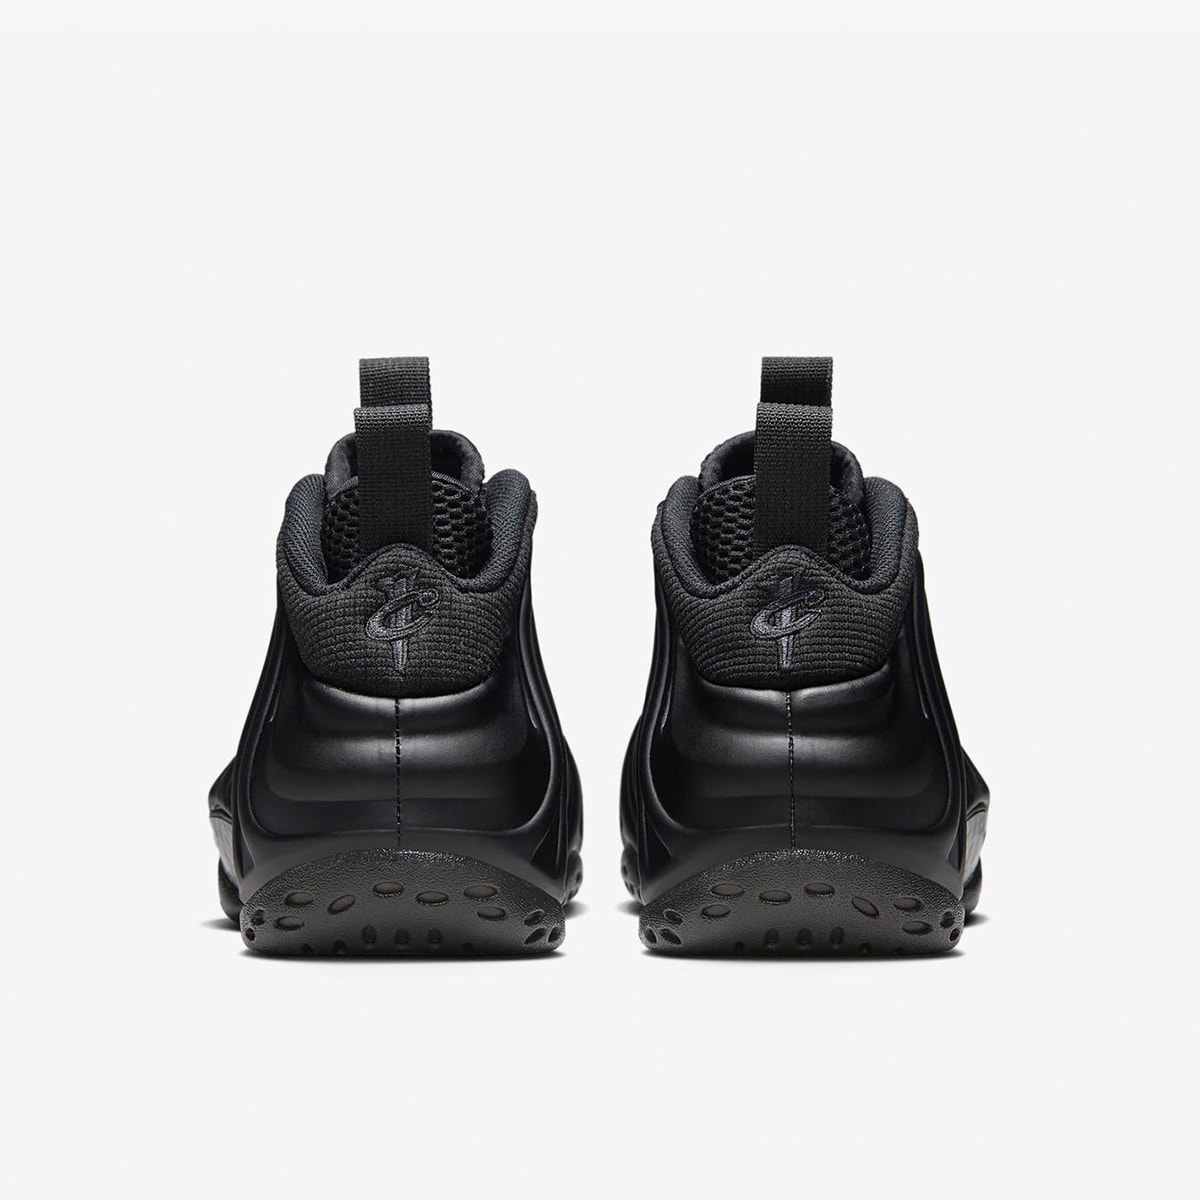 Nike Air Foamposite One (Black & Anthracite) | END. Launches